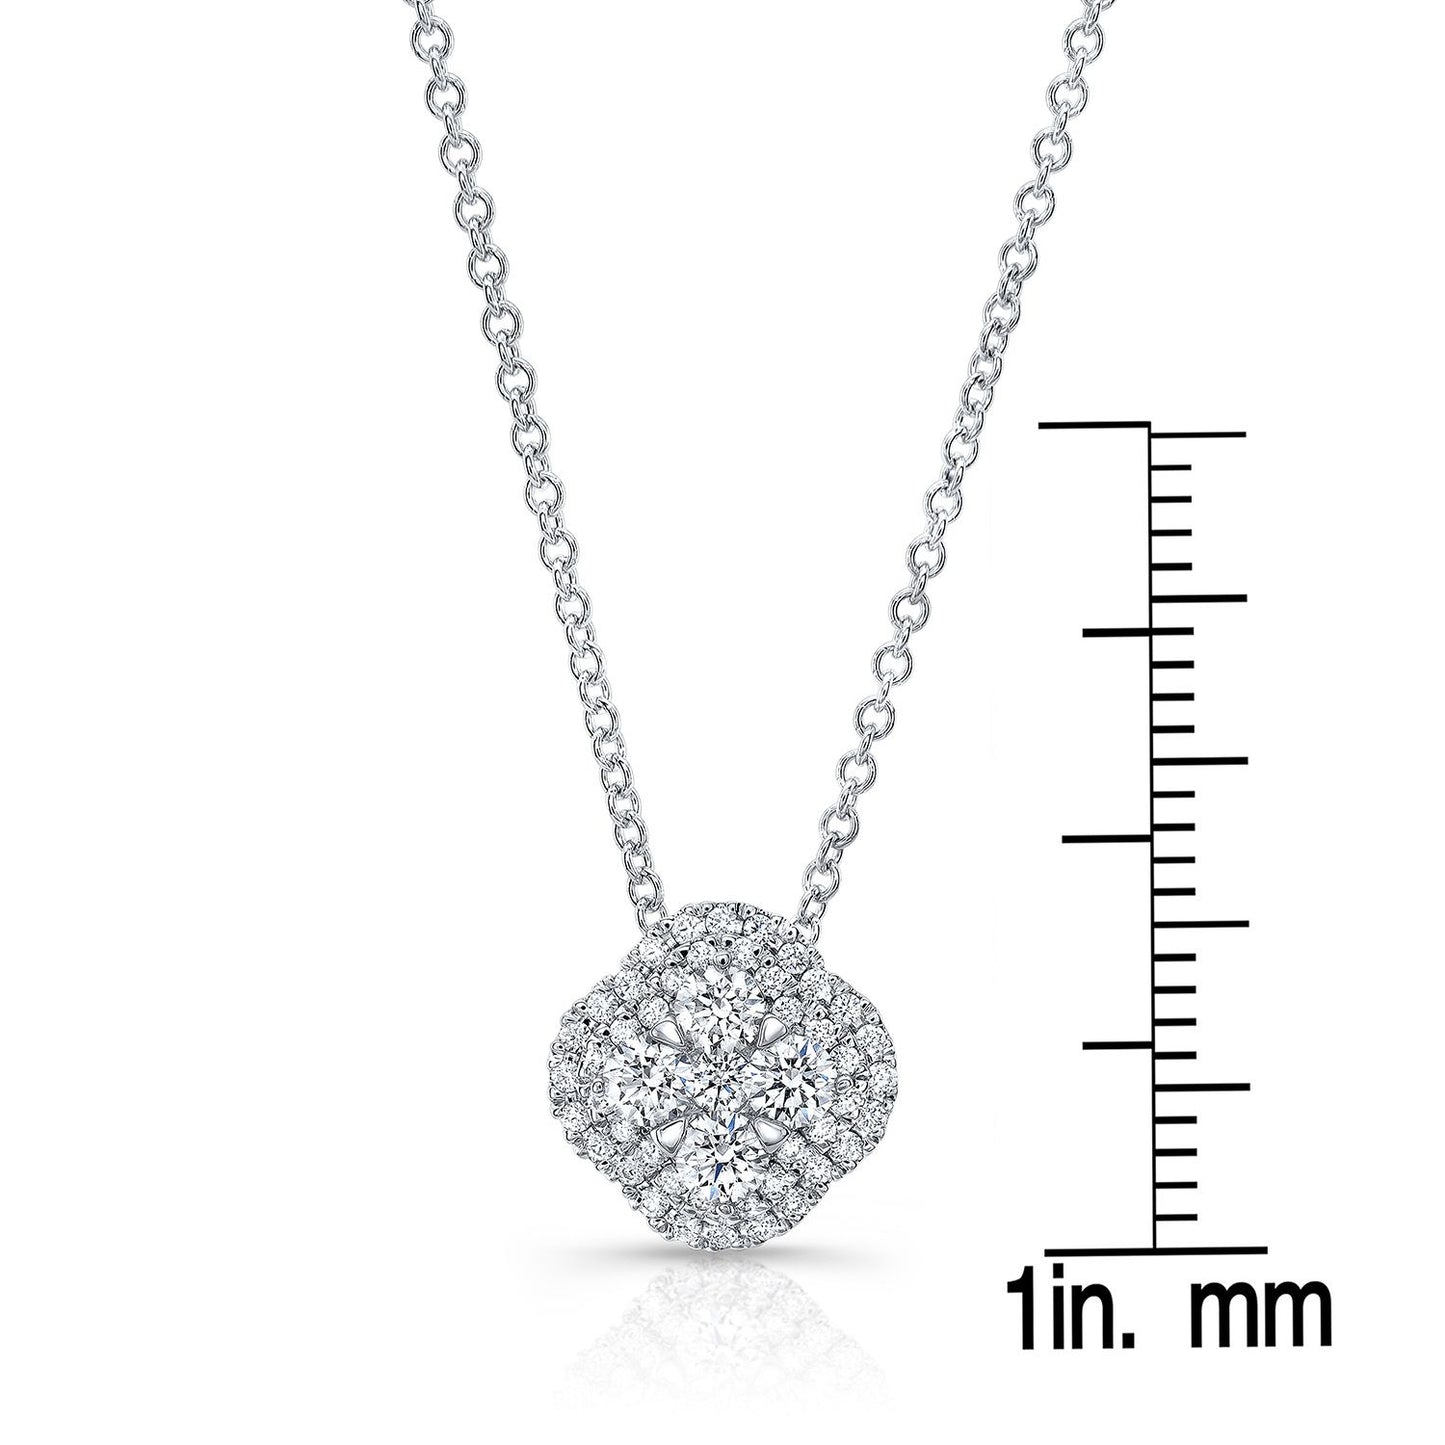 Diamond Clster And Cushion Shape Pendant With Micro-prong Set Border In 14k White Gold